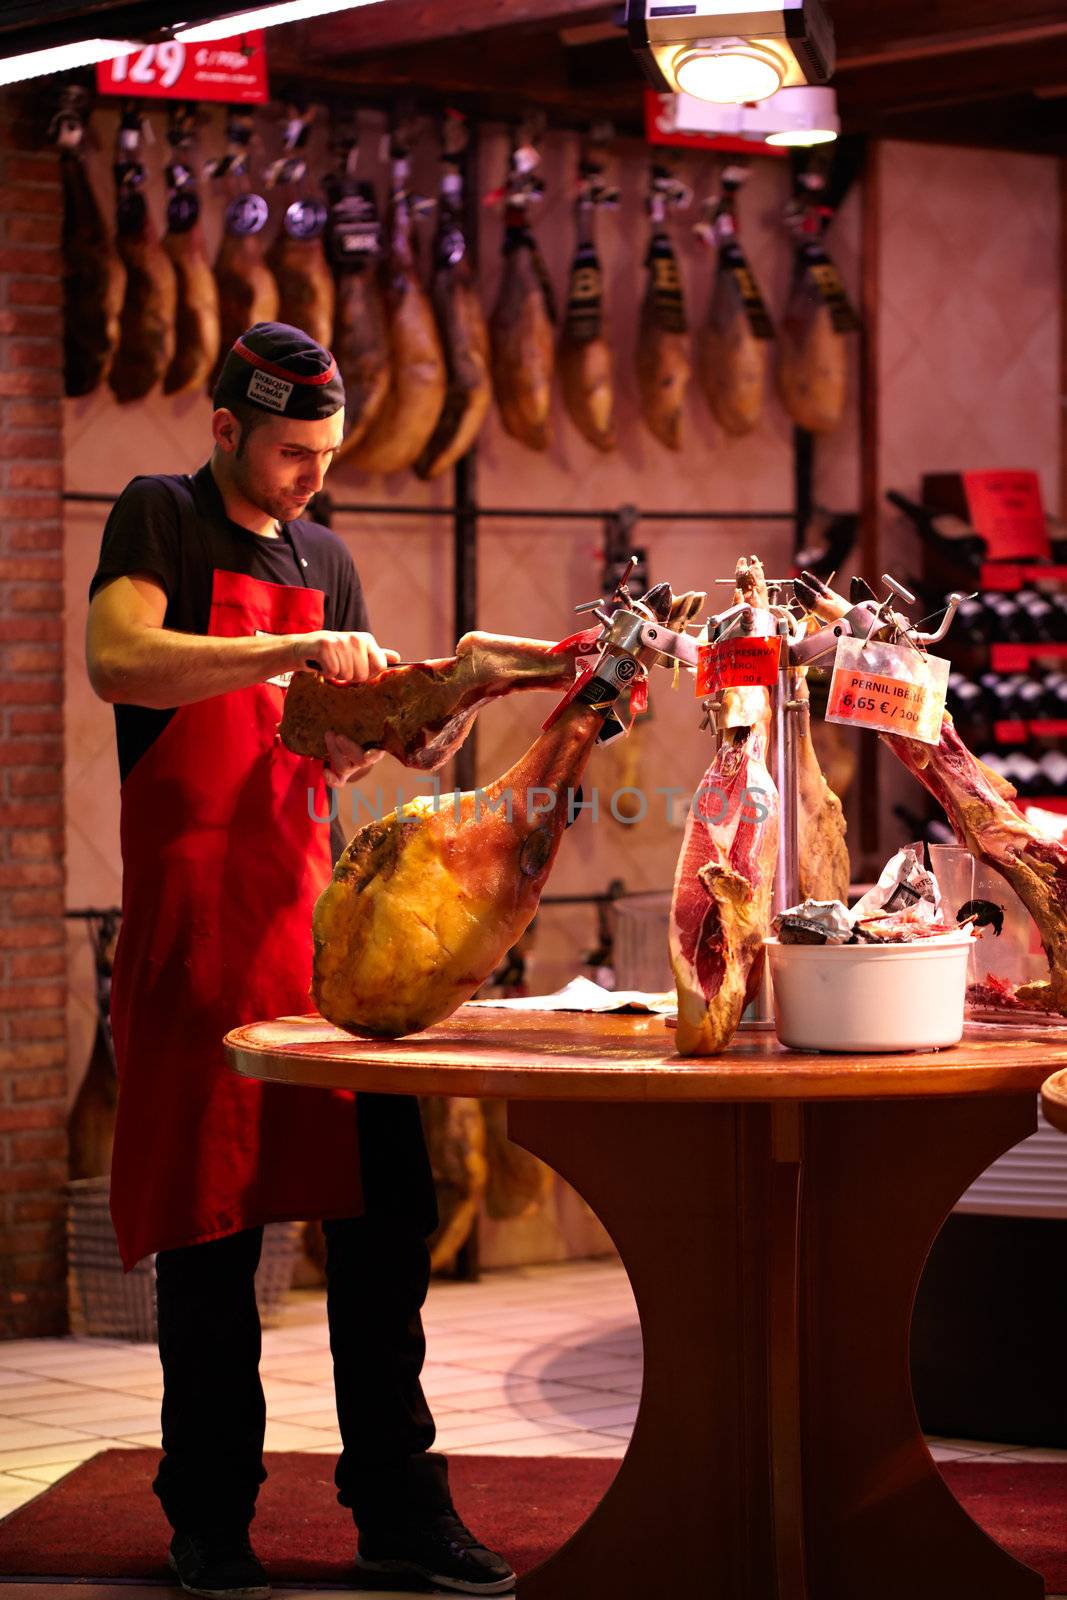 BARCELONA - MAY 21: Young man, a jamon seller, in a robe and cap is cutting meat in the supermarket on May 21, 2012 in Barcelona, Spain.